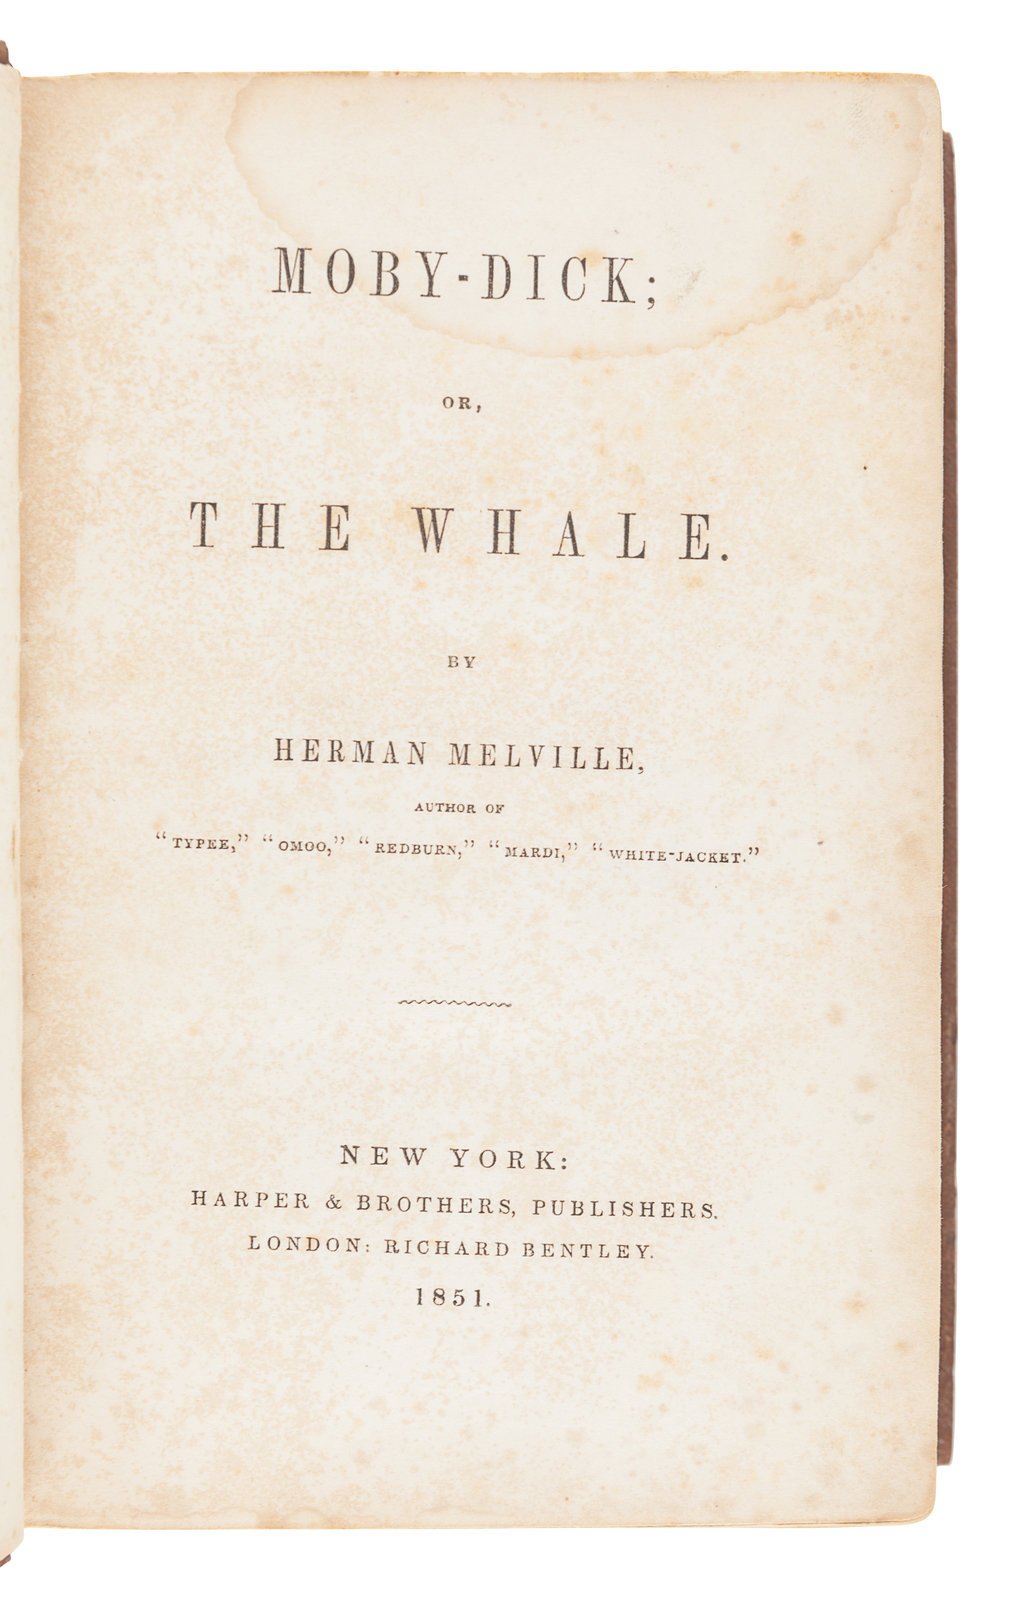 MELVILLE, Herman (1819-1891). Moby-Dick; or, the Whale. New York: Harper & Brothers, 1851. Image courtesy Hindman Auctions.